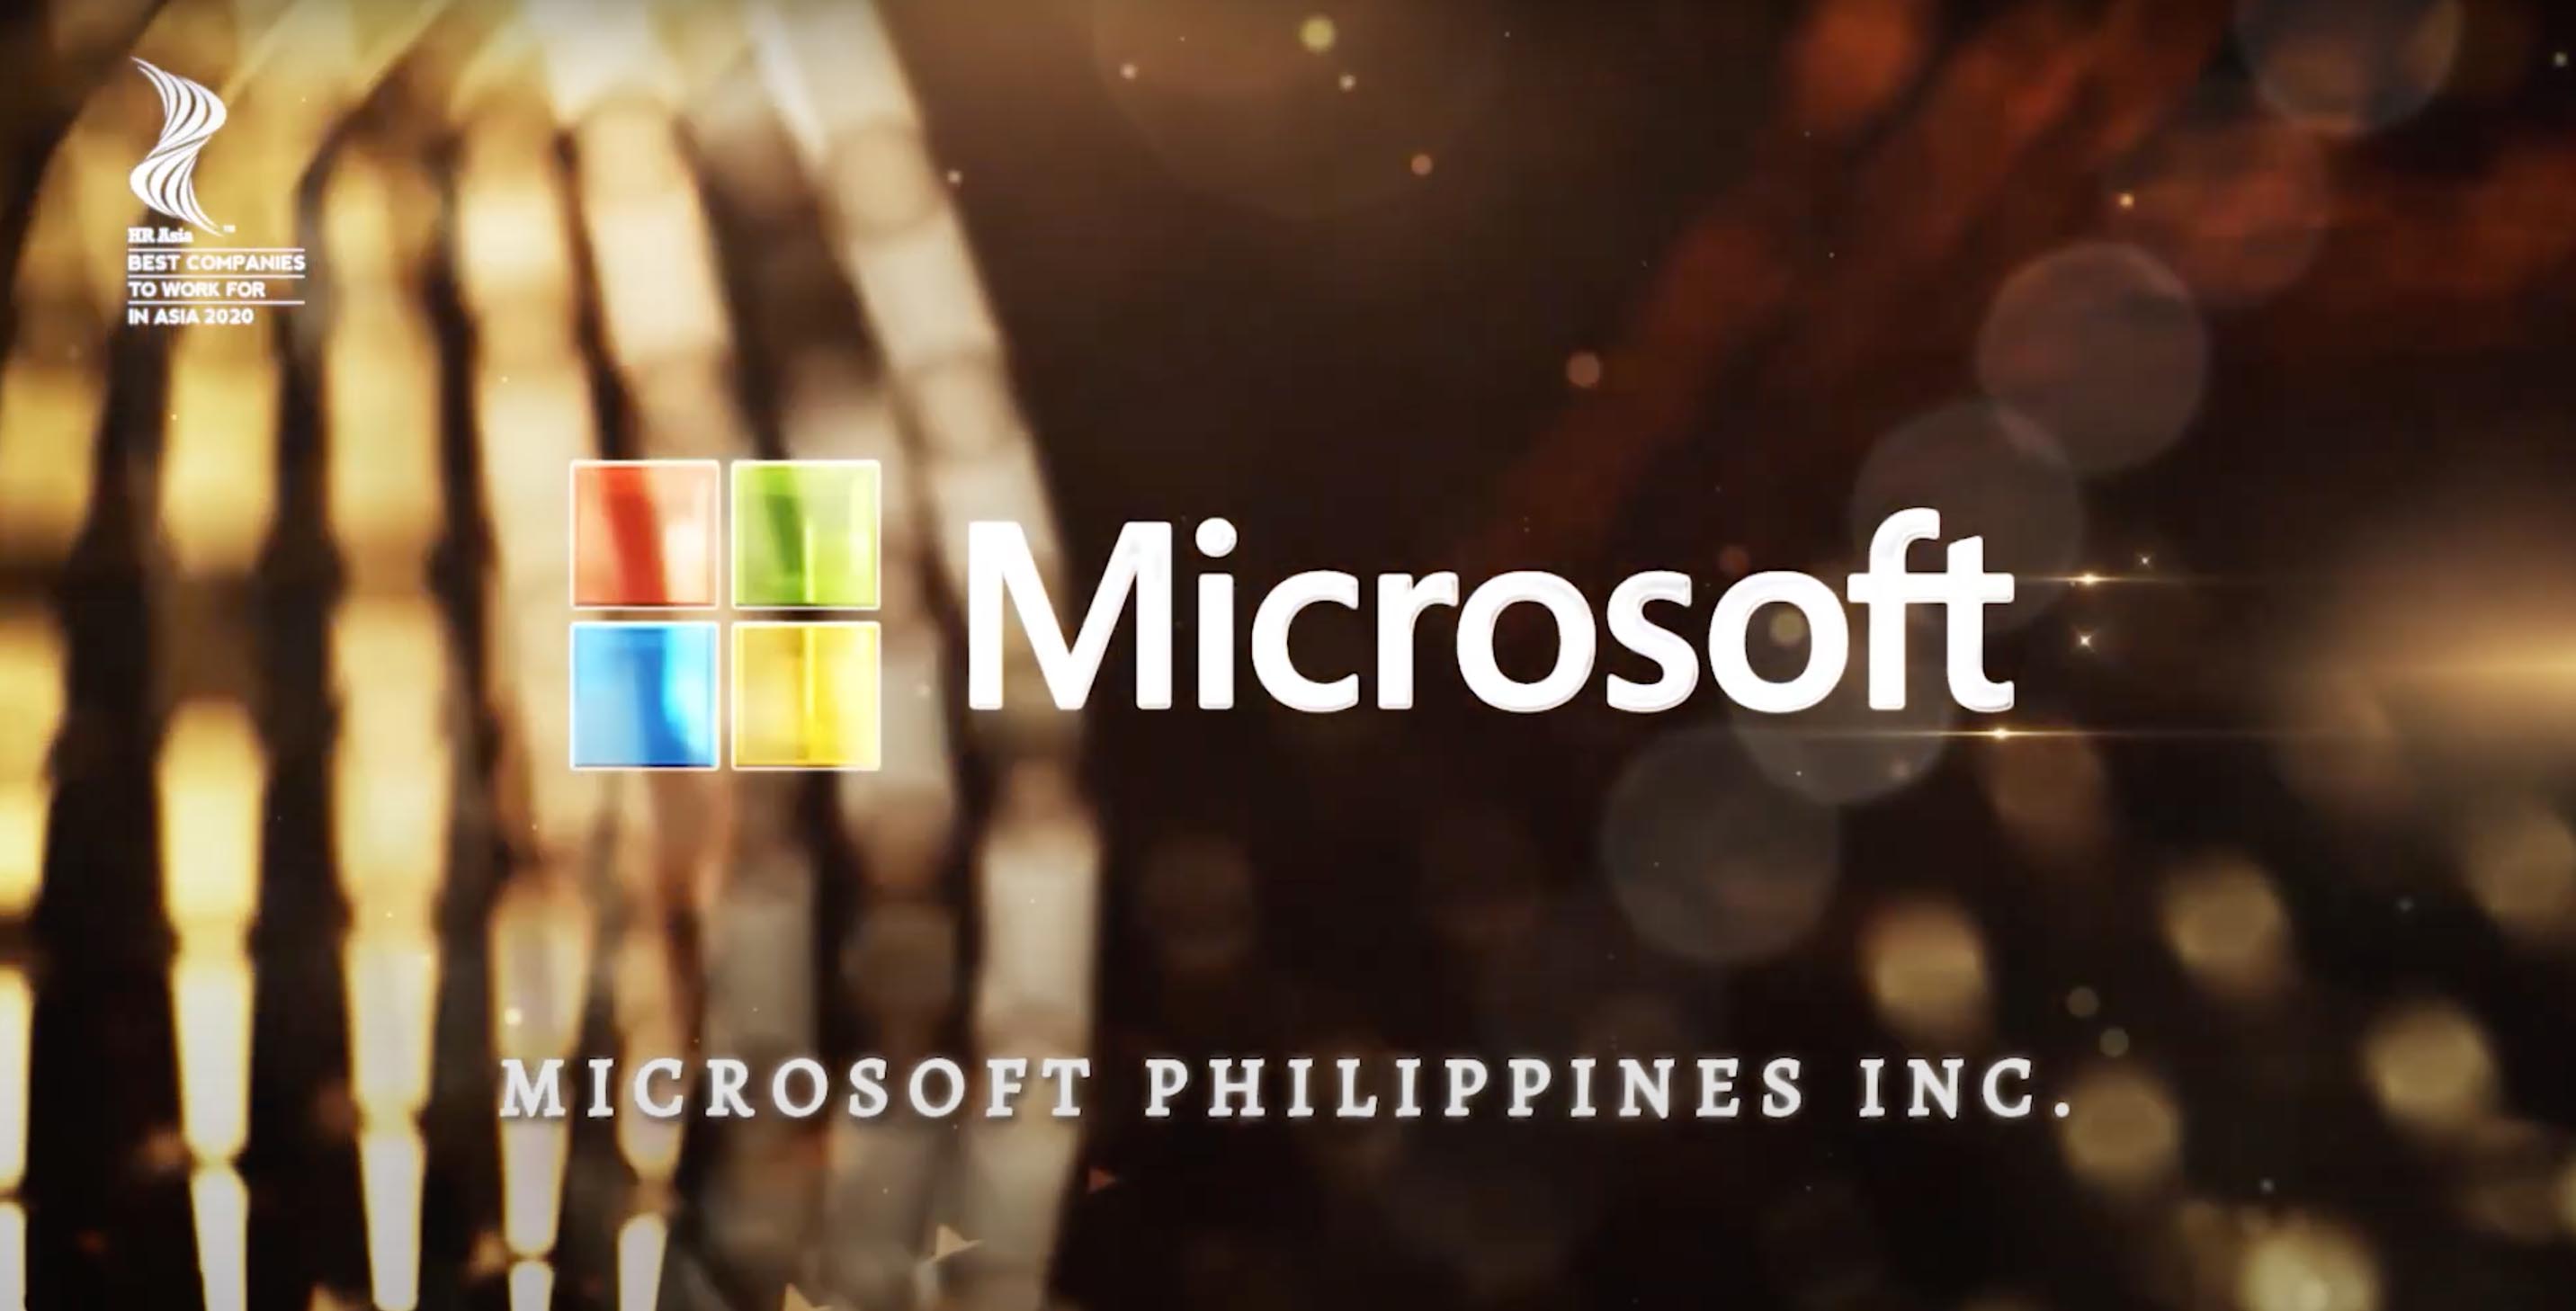 Microsoft Philippines Recognized Among HR Asia’s  ‘Best Companies to Work for in Asia 2020’